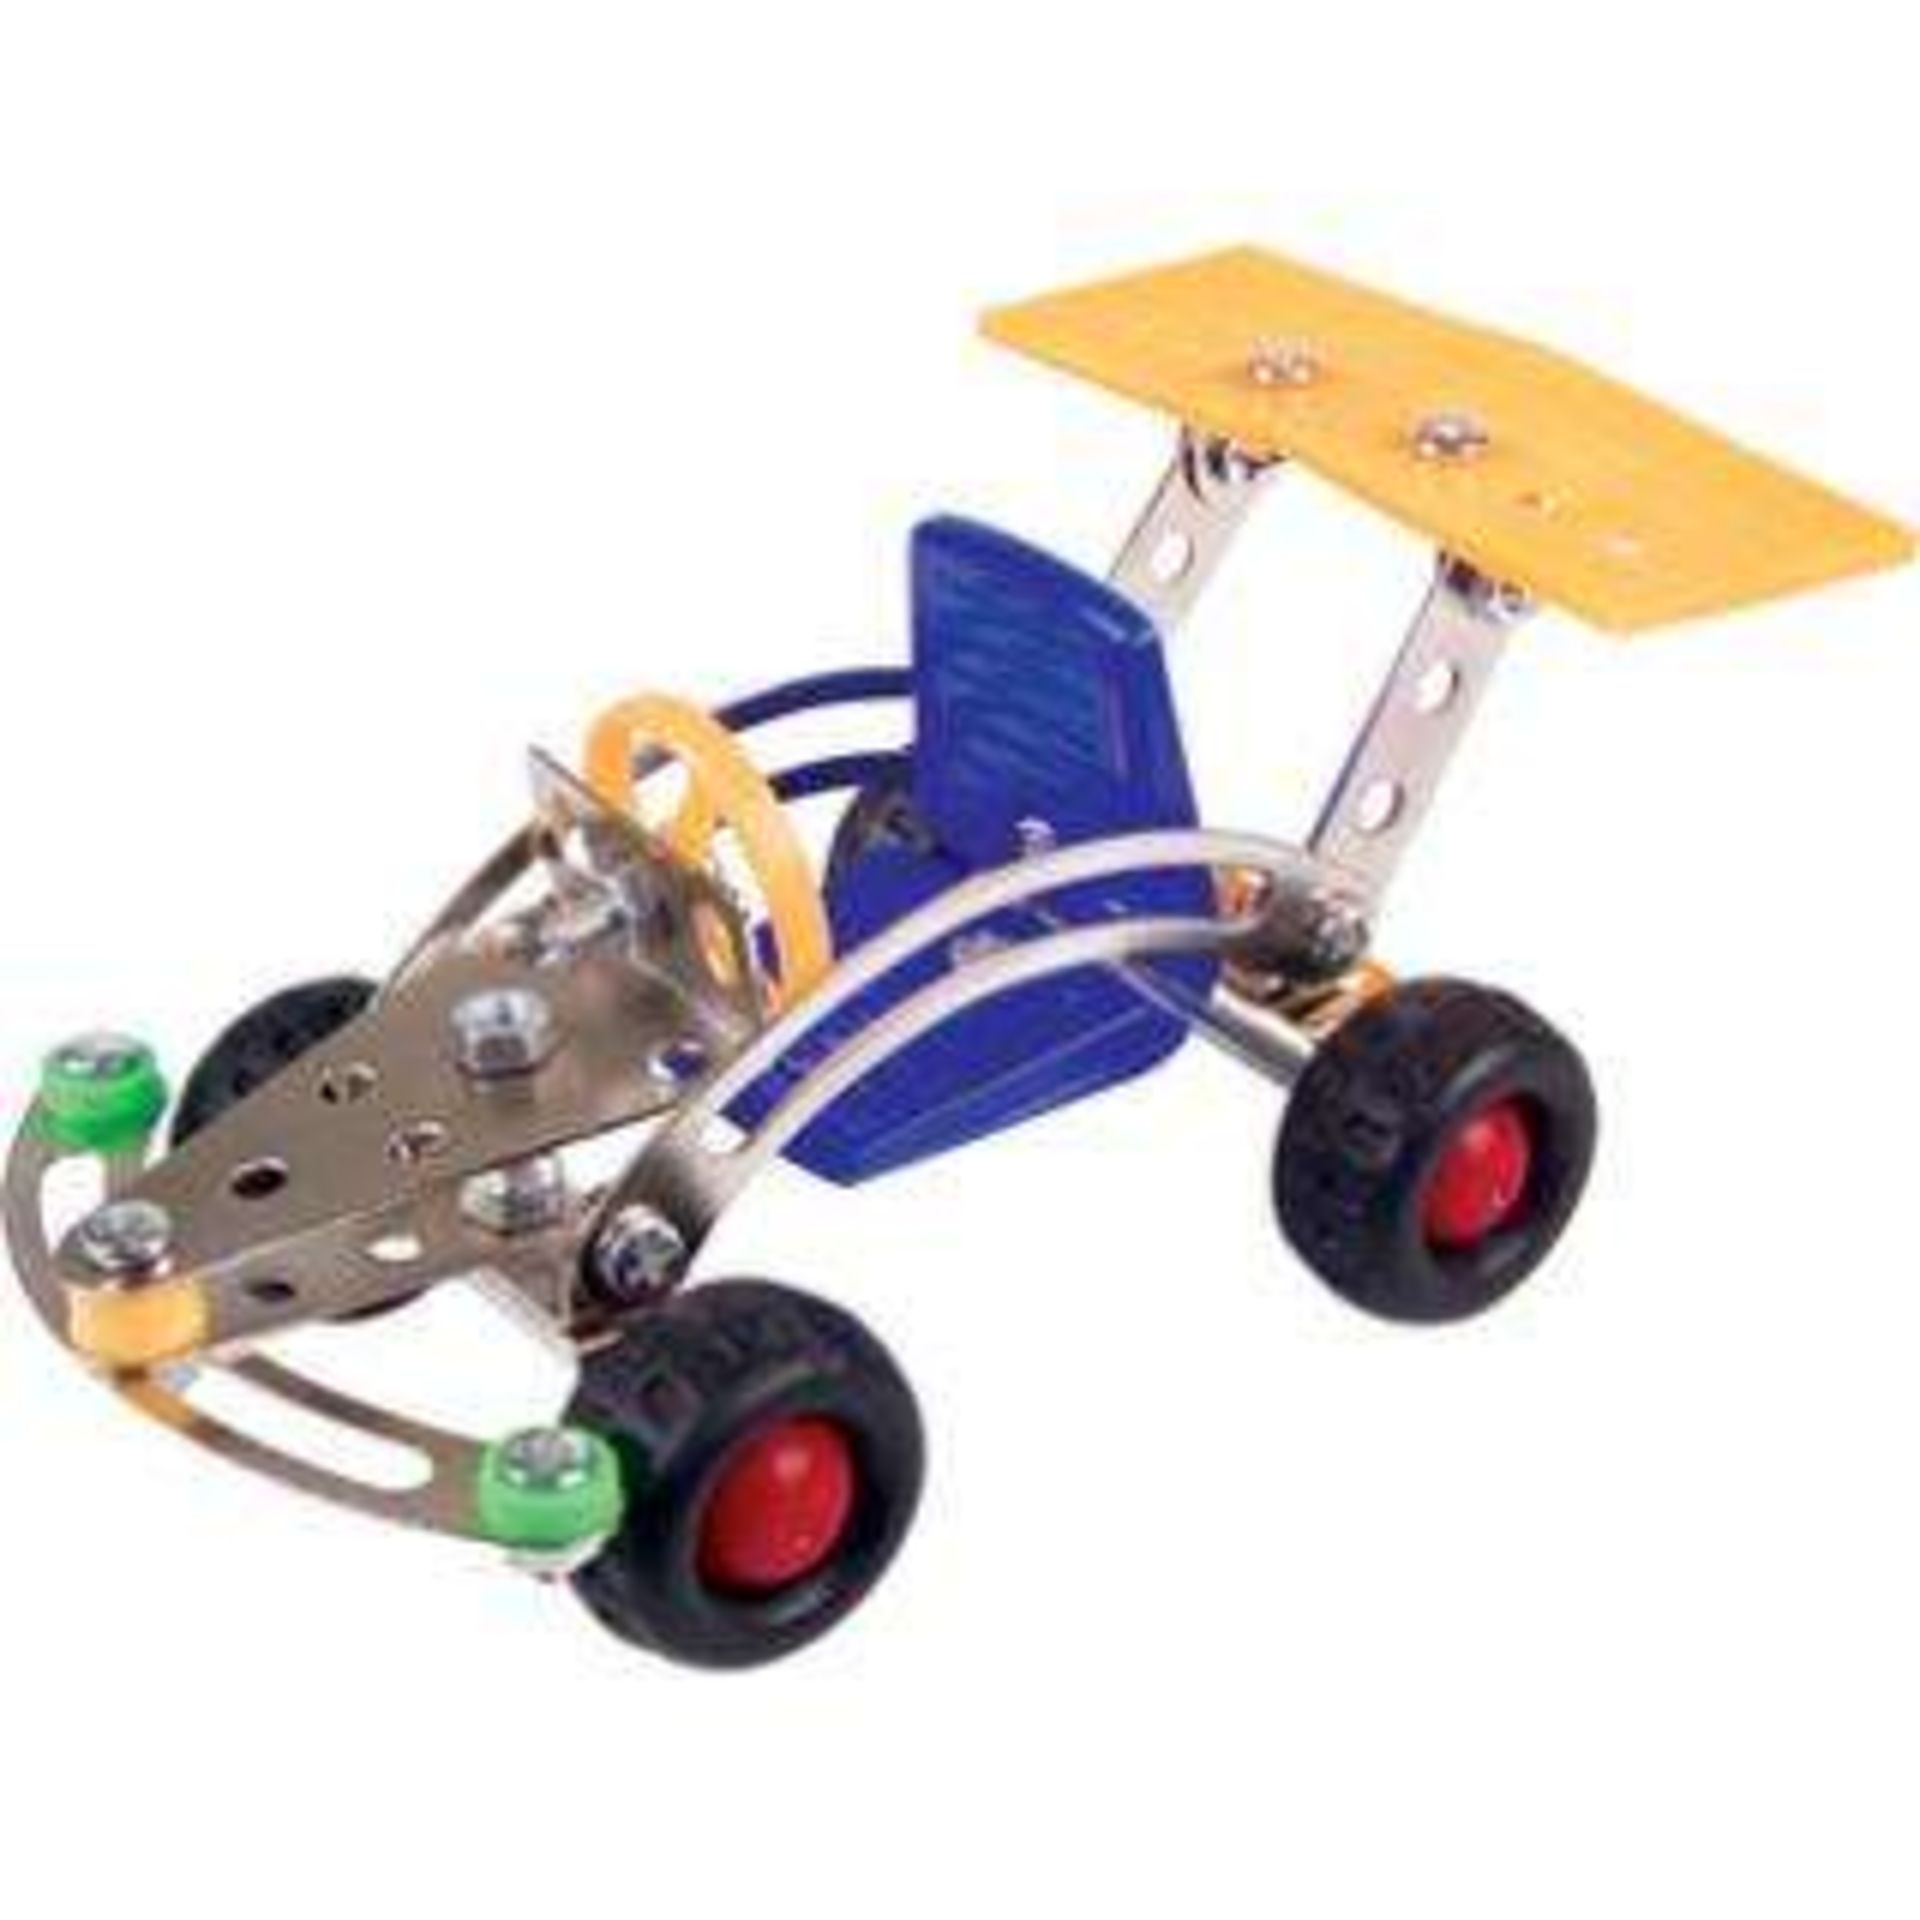 + VAT Brand New Small Meccano Style Set Assorted - Builds Cars - Planes - Motorcycles etc - Image 2 of 2